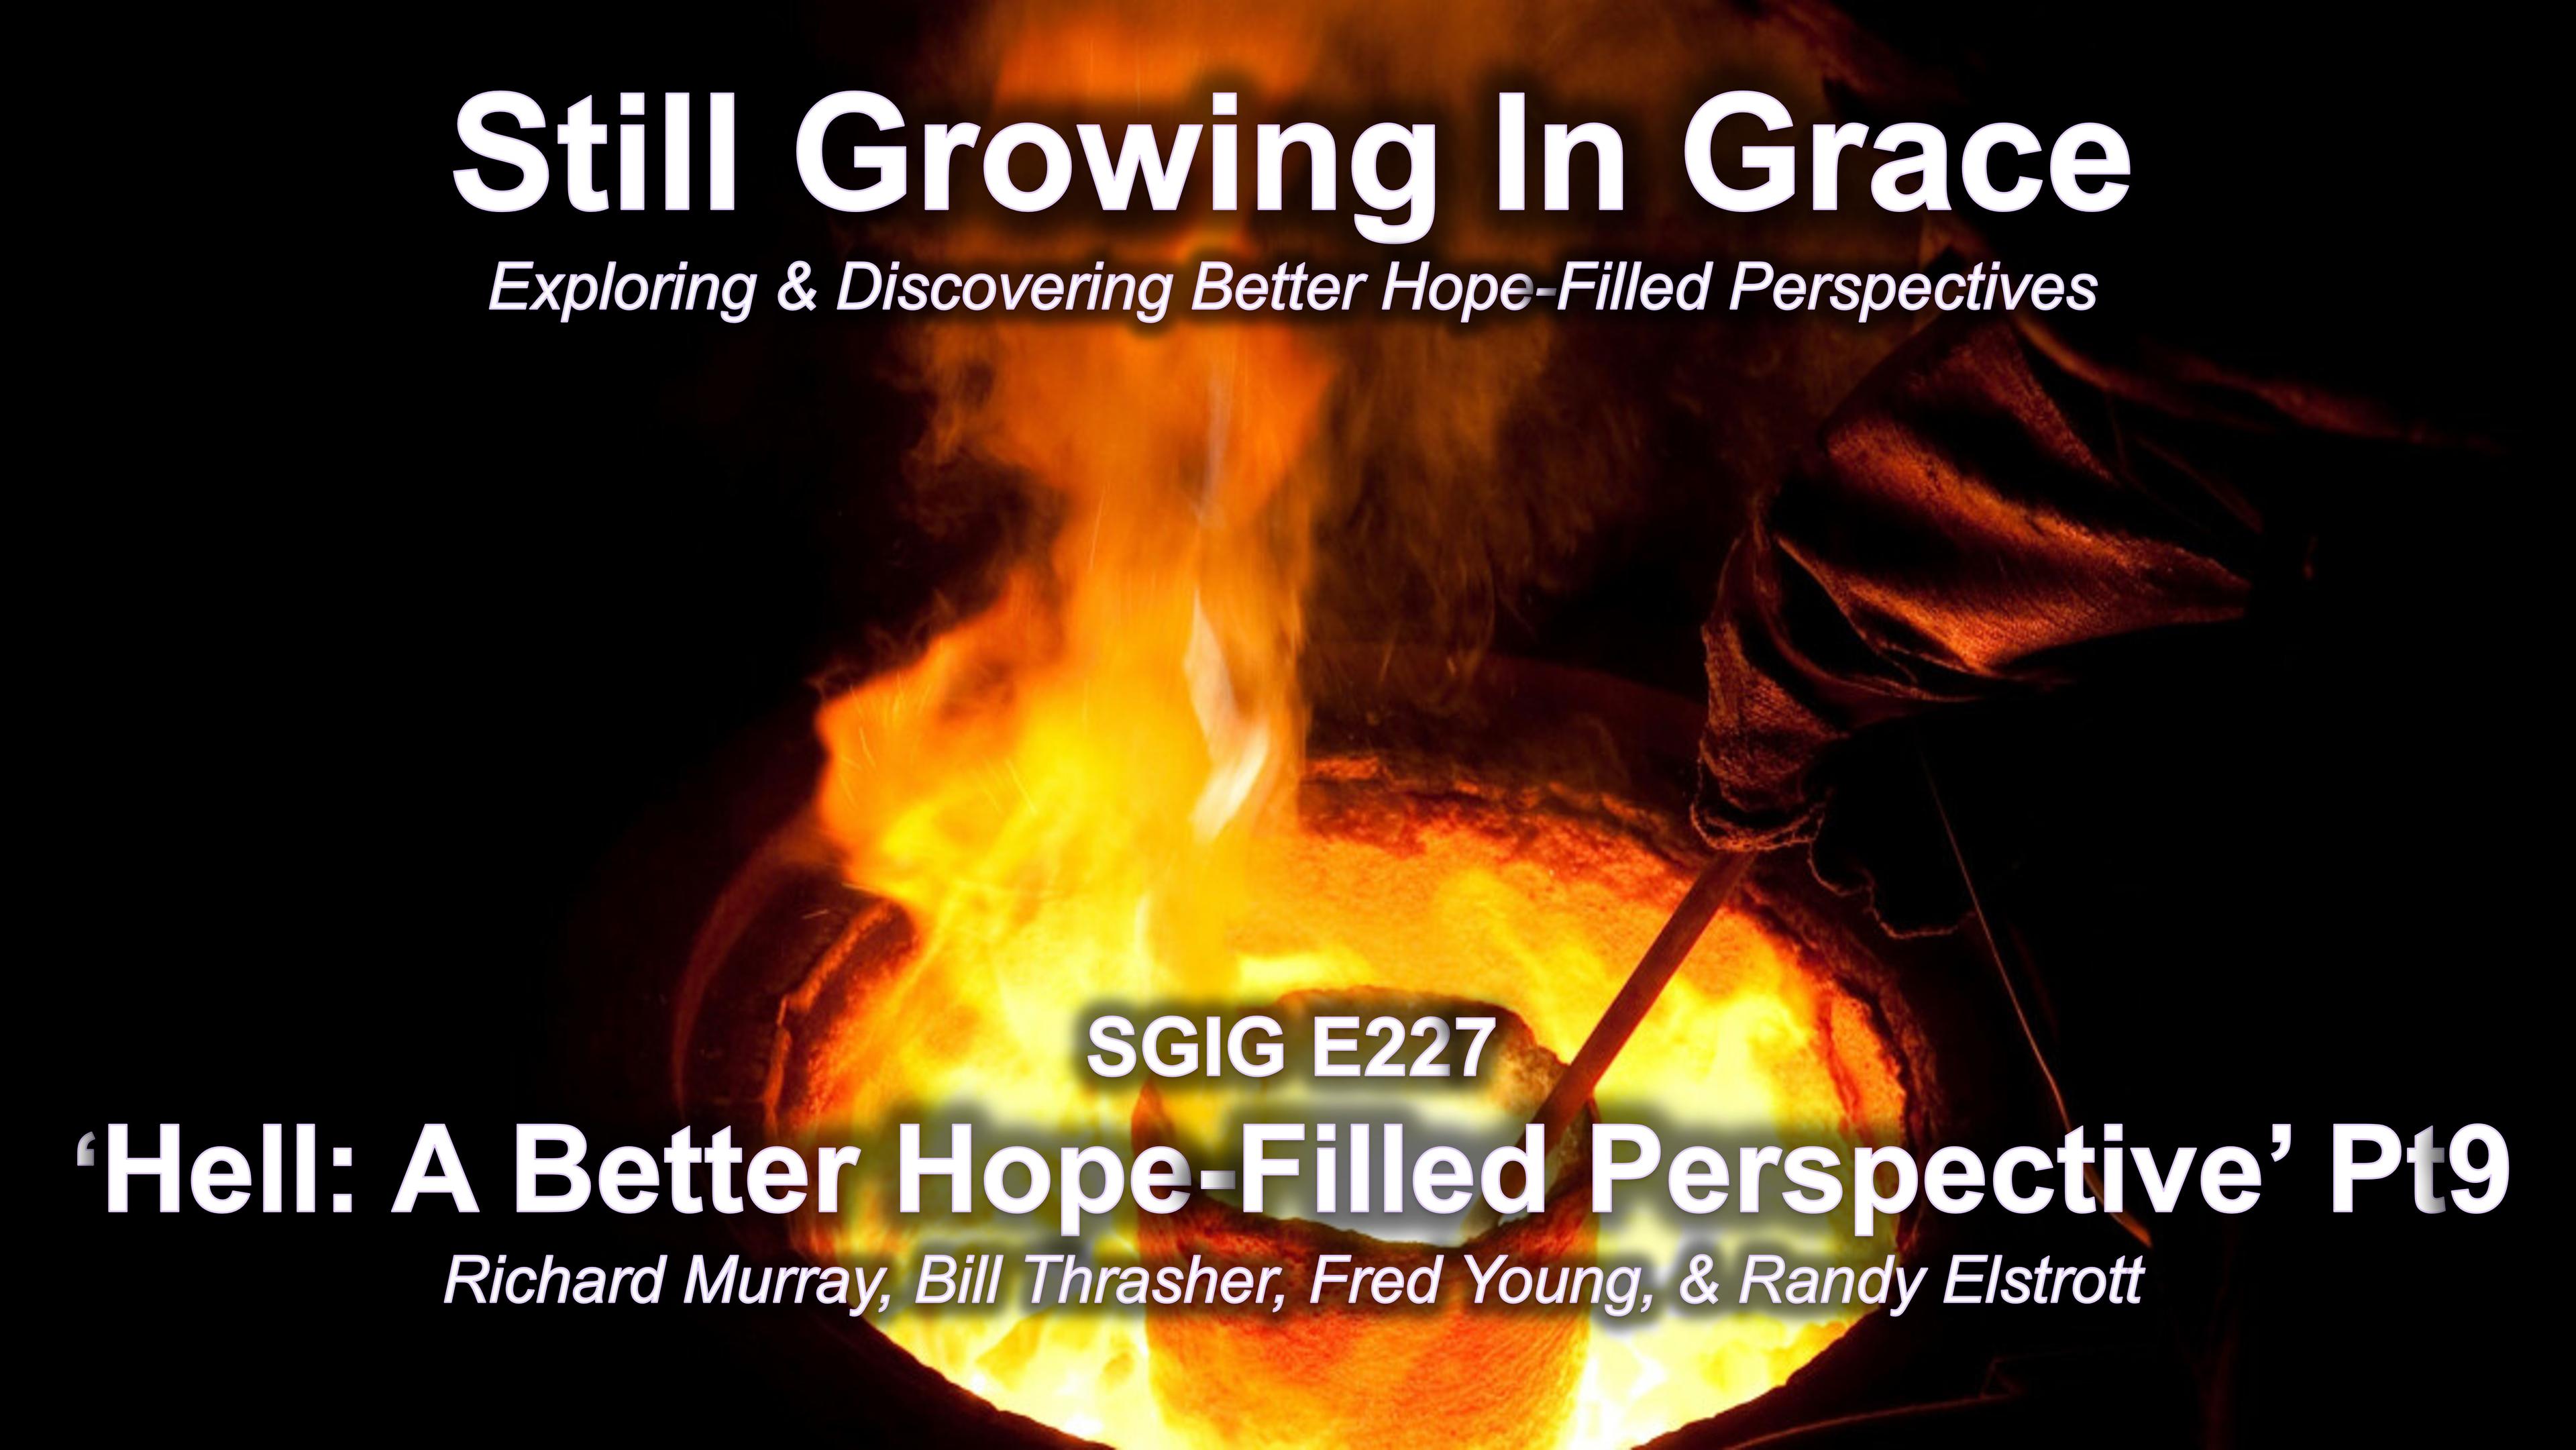 SGIG E227 Hell Part 9  Fear That Feed Lies Re Hell, Why Evangelize?